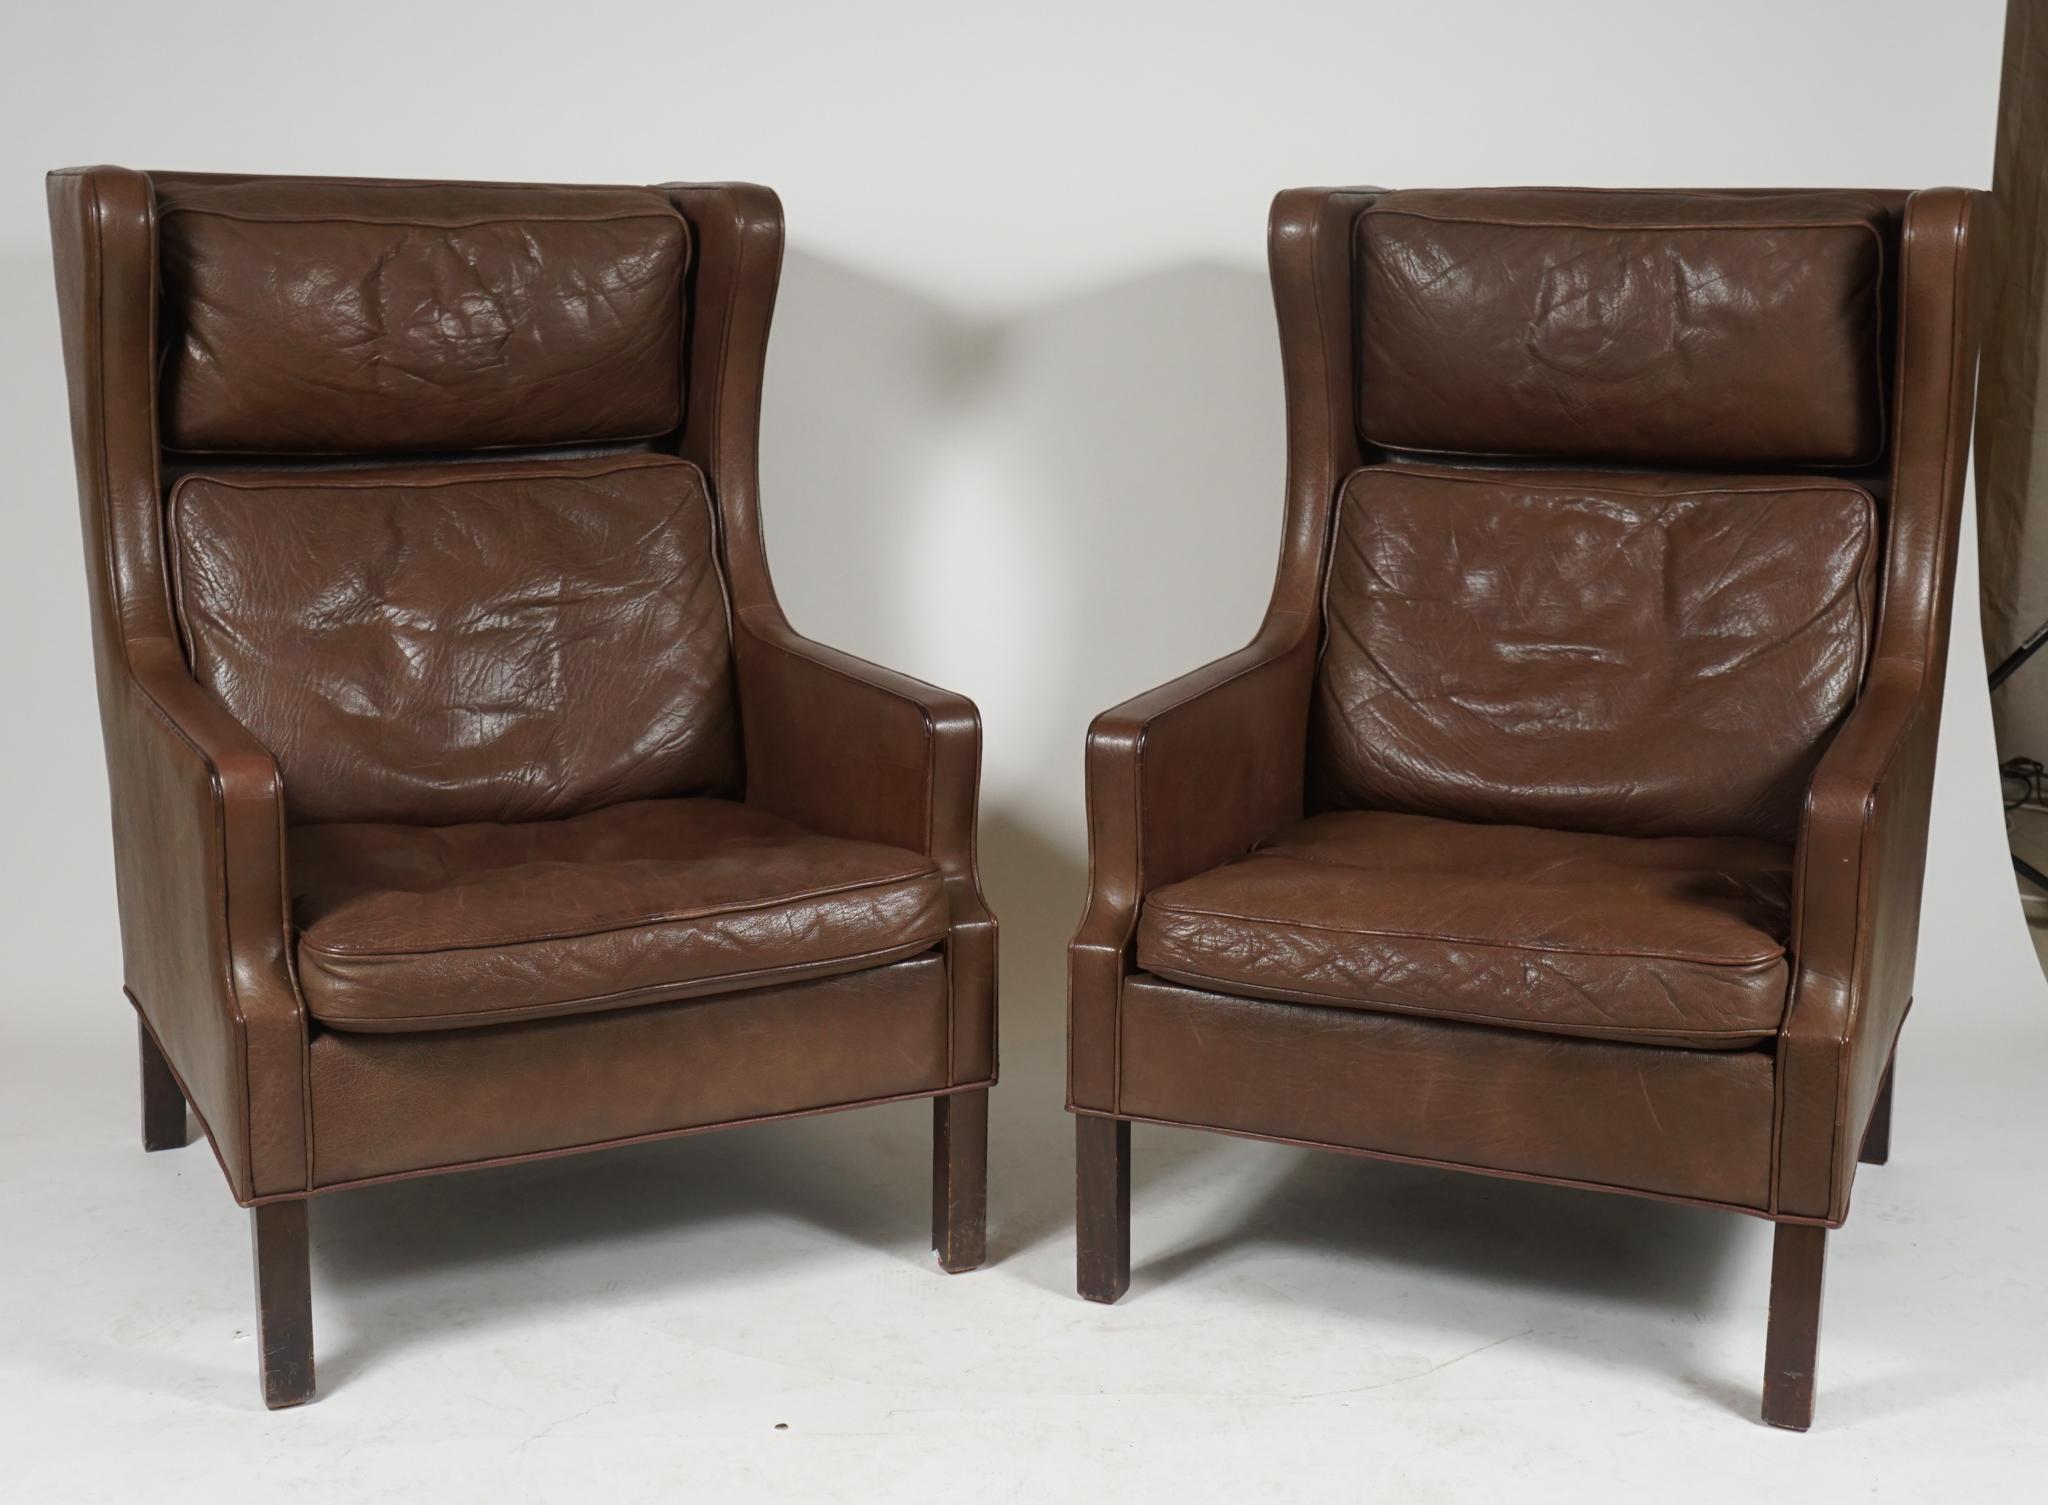 Handsome pair of Børge Møgensen style Danish modern high-backed, wingback armchairs, in dark brown leather. Perfect comfort, Danish elegance.